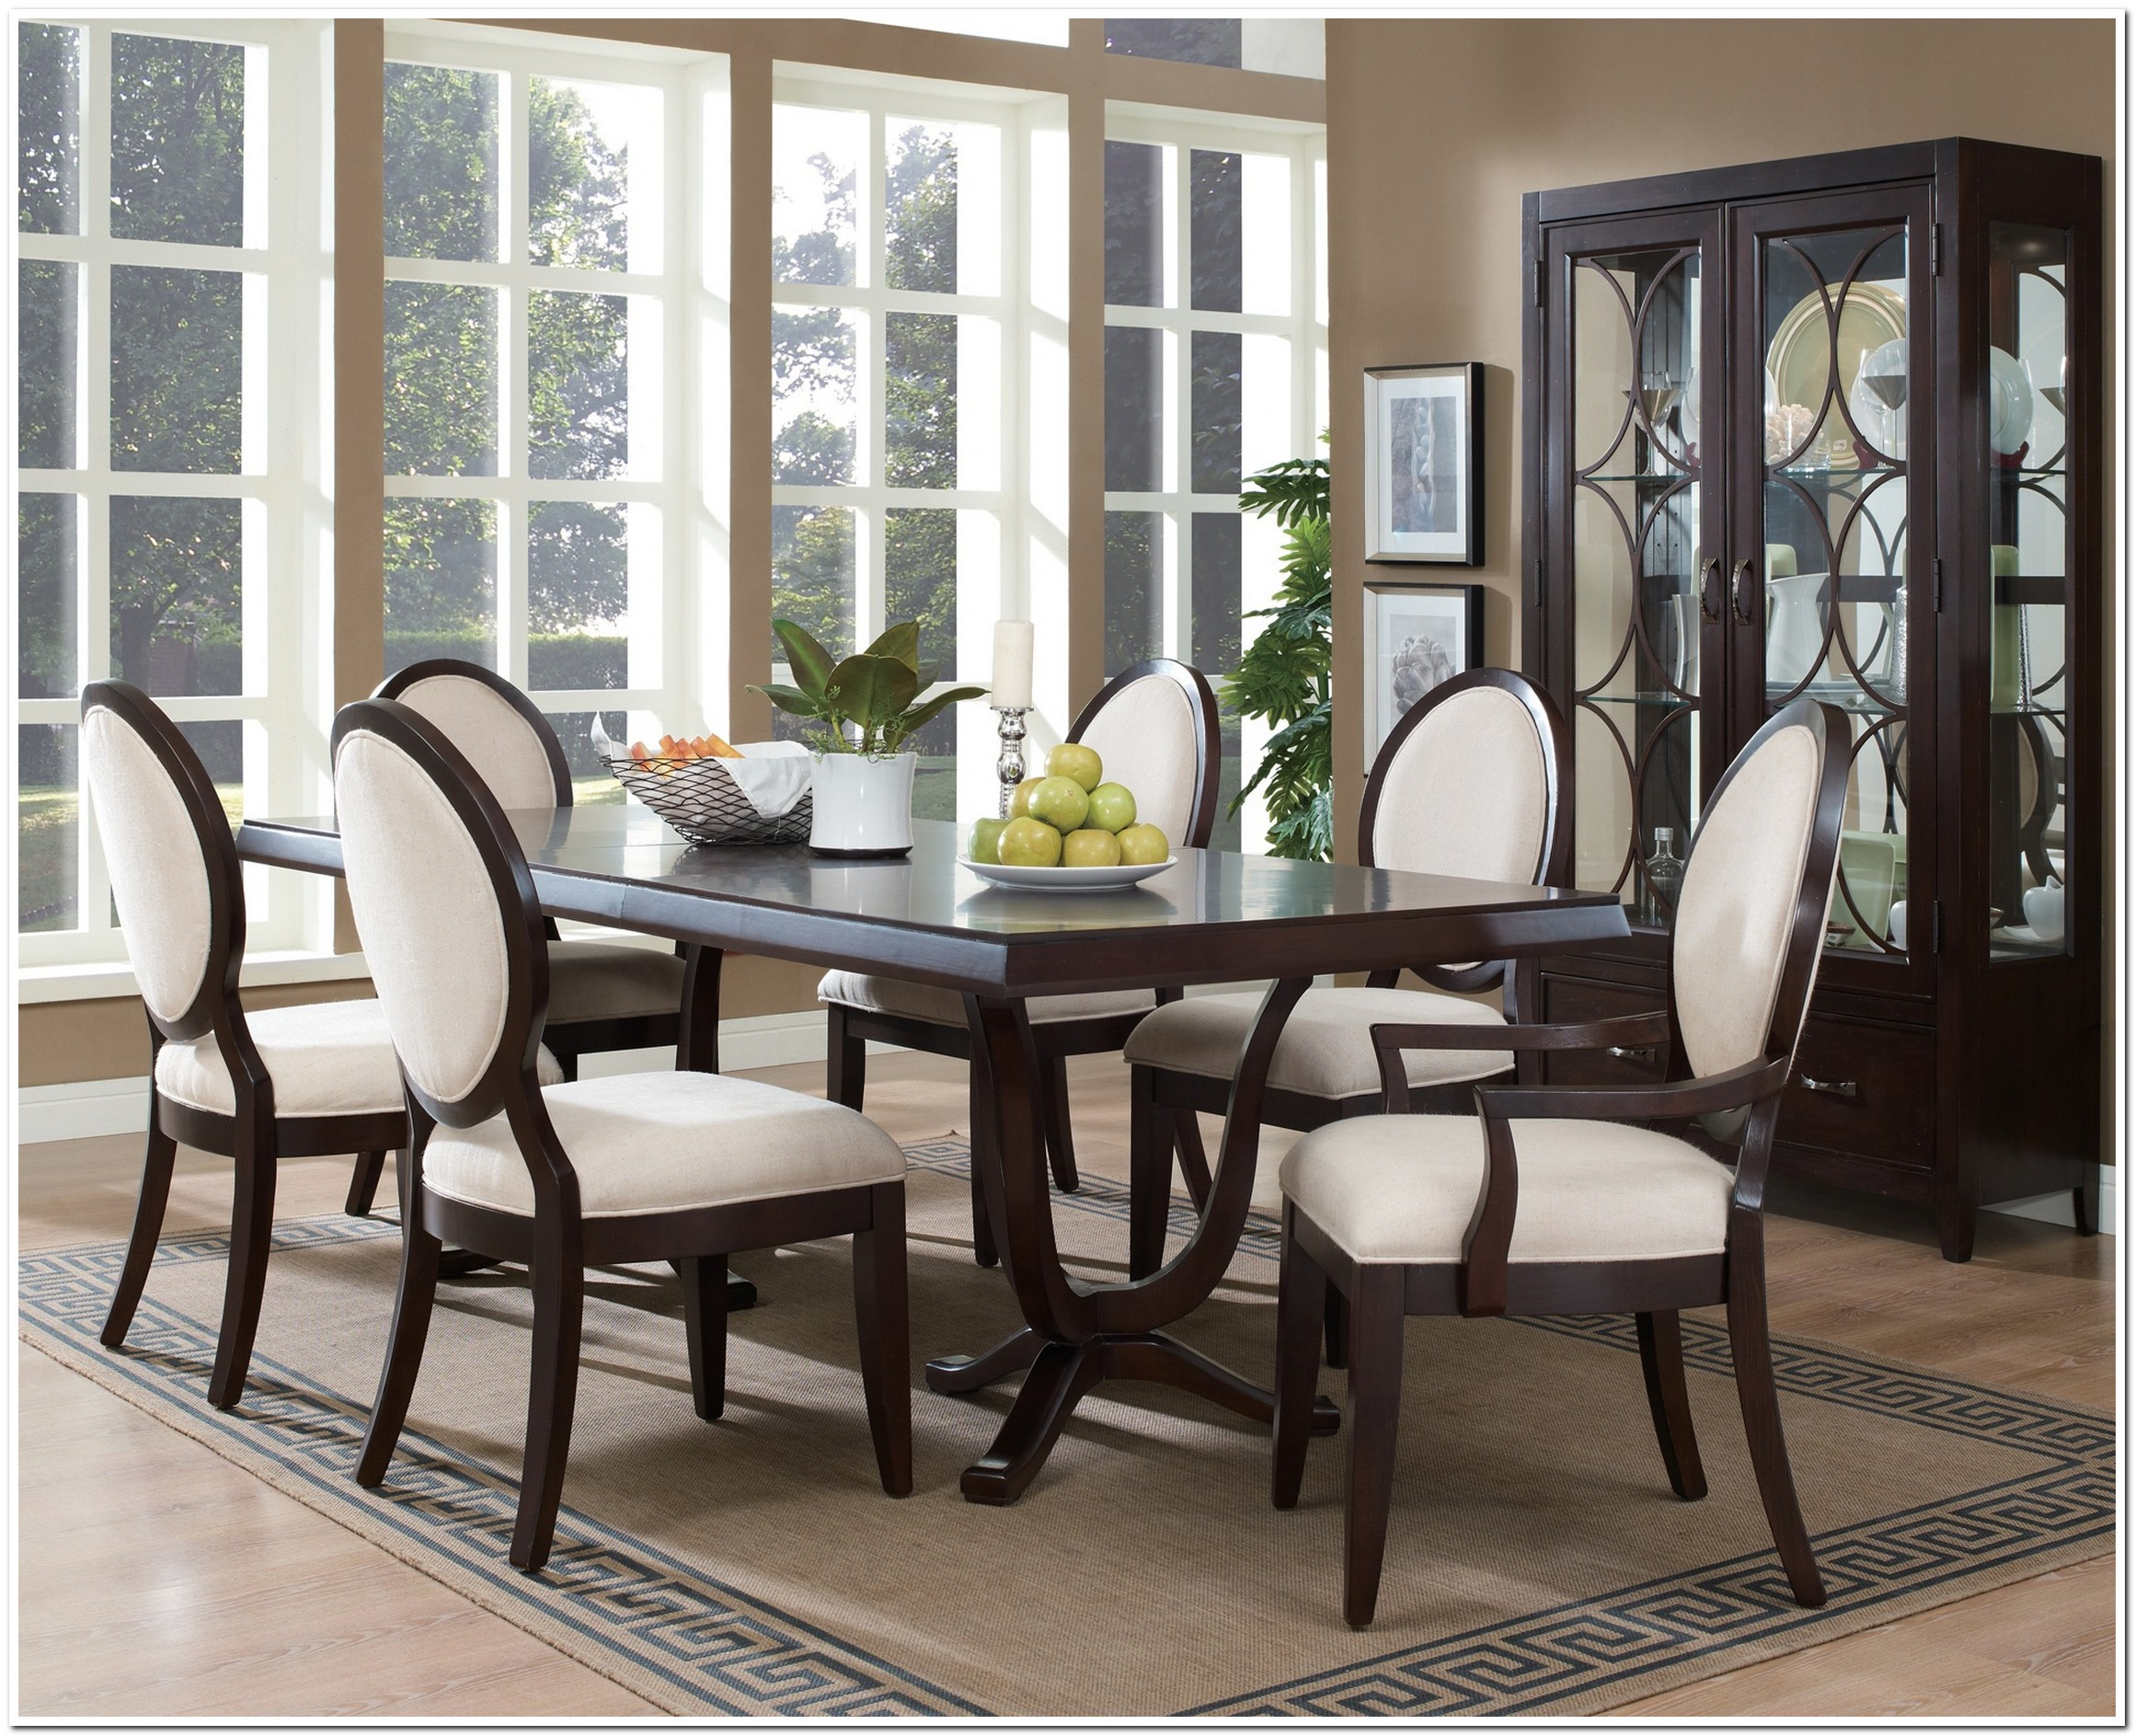 Small European Dining Room Sets • Faucet Ideas Site